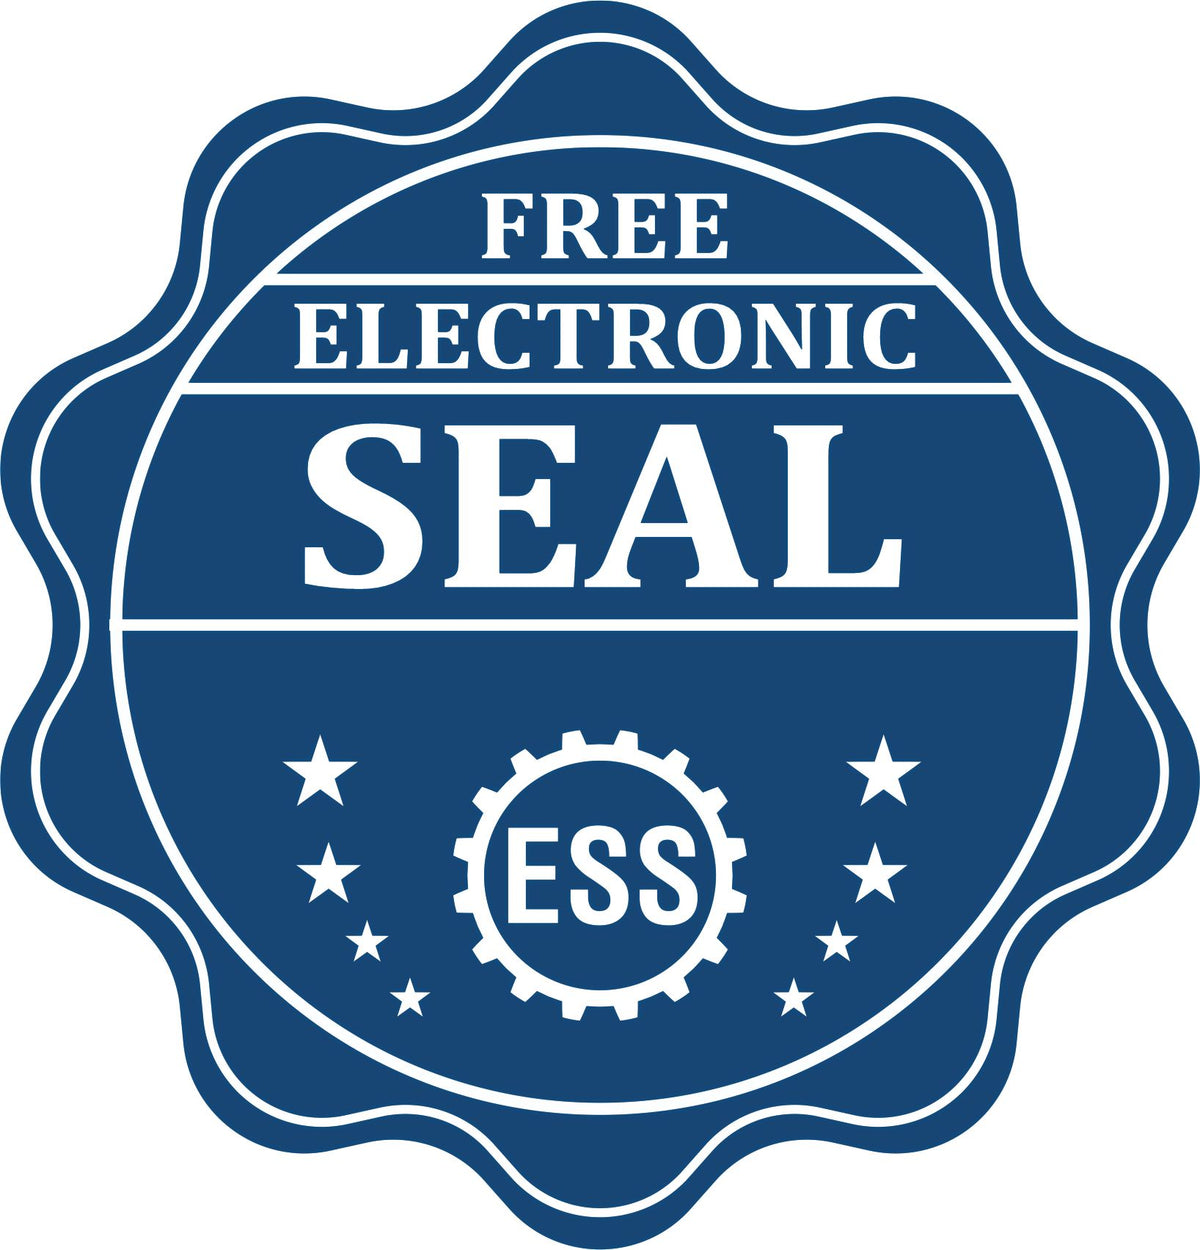 A badge showing a free electronic seal for the District of Columbia Architectural Seal Embosser with stars and the ESS gear on the emblem.